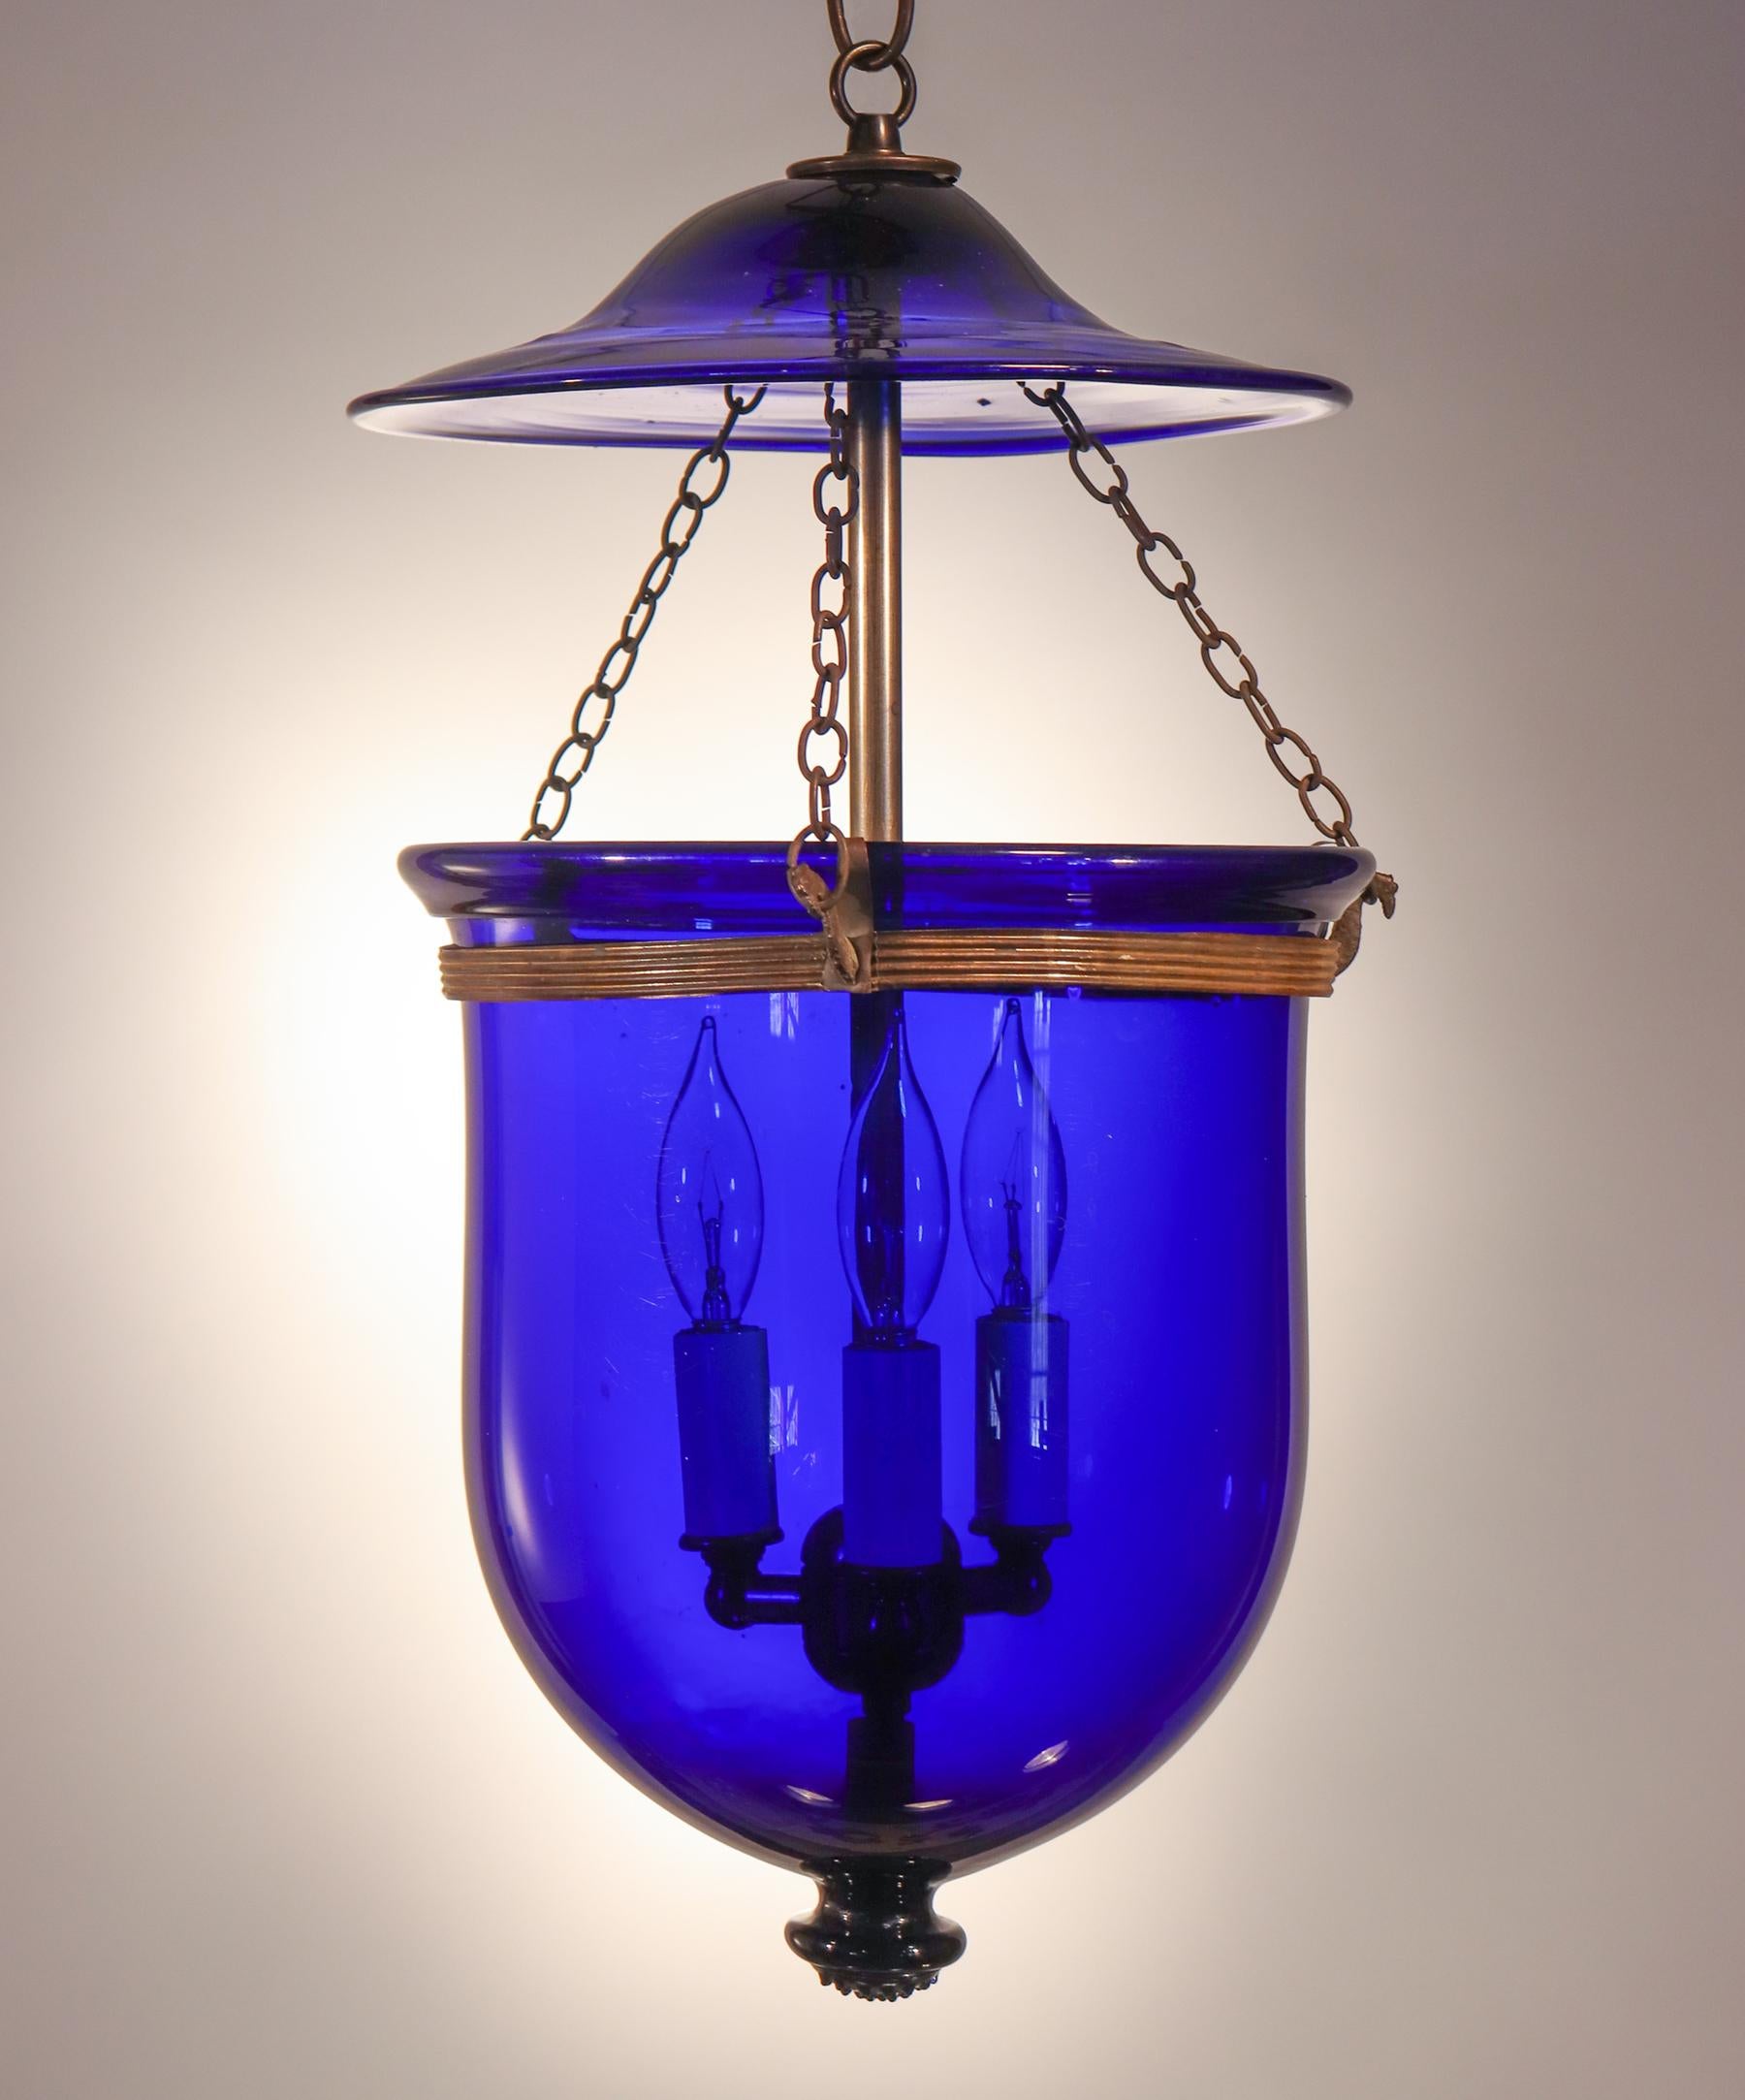 A striking cobalt blue hand blown glass bell jar lantern with its original smoke bell and rolled brass band, circa 1890. Originally for candlelight, this antique pendant has been newly electrified and casts a warm light from its three-bulb